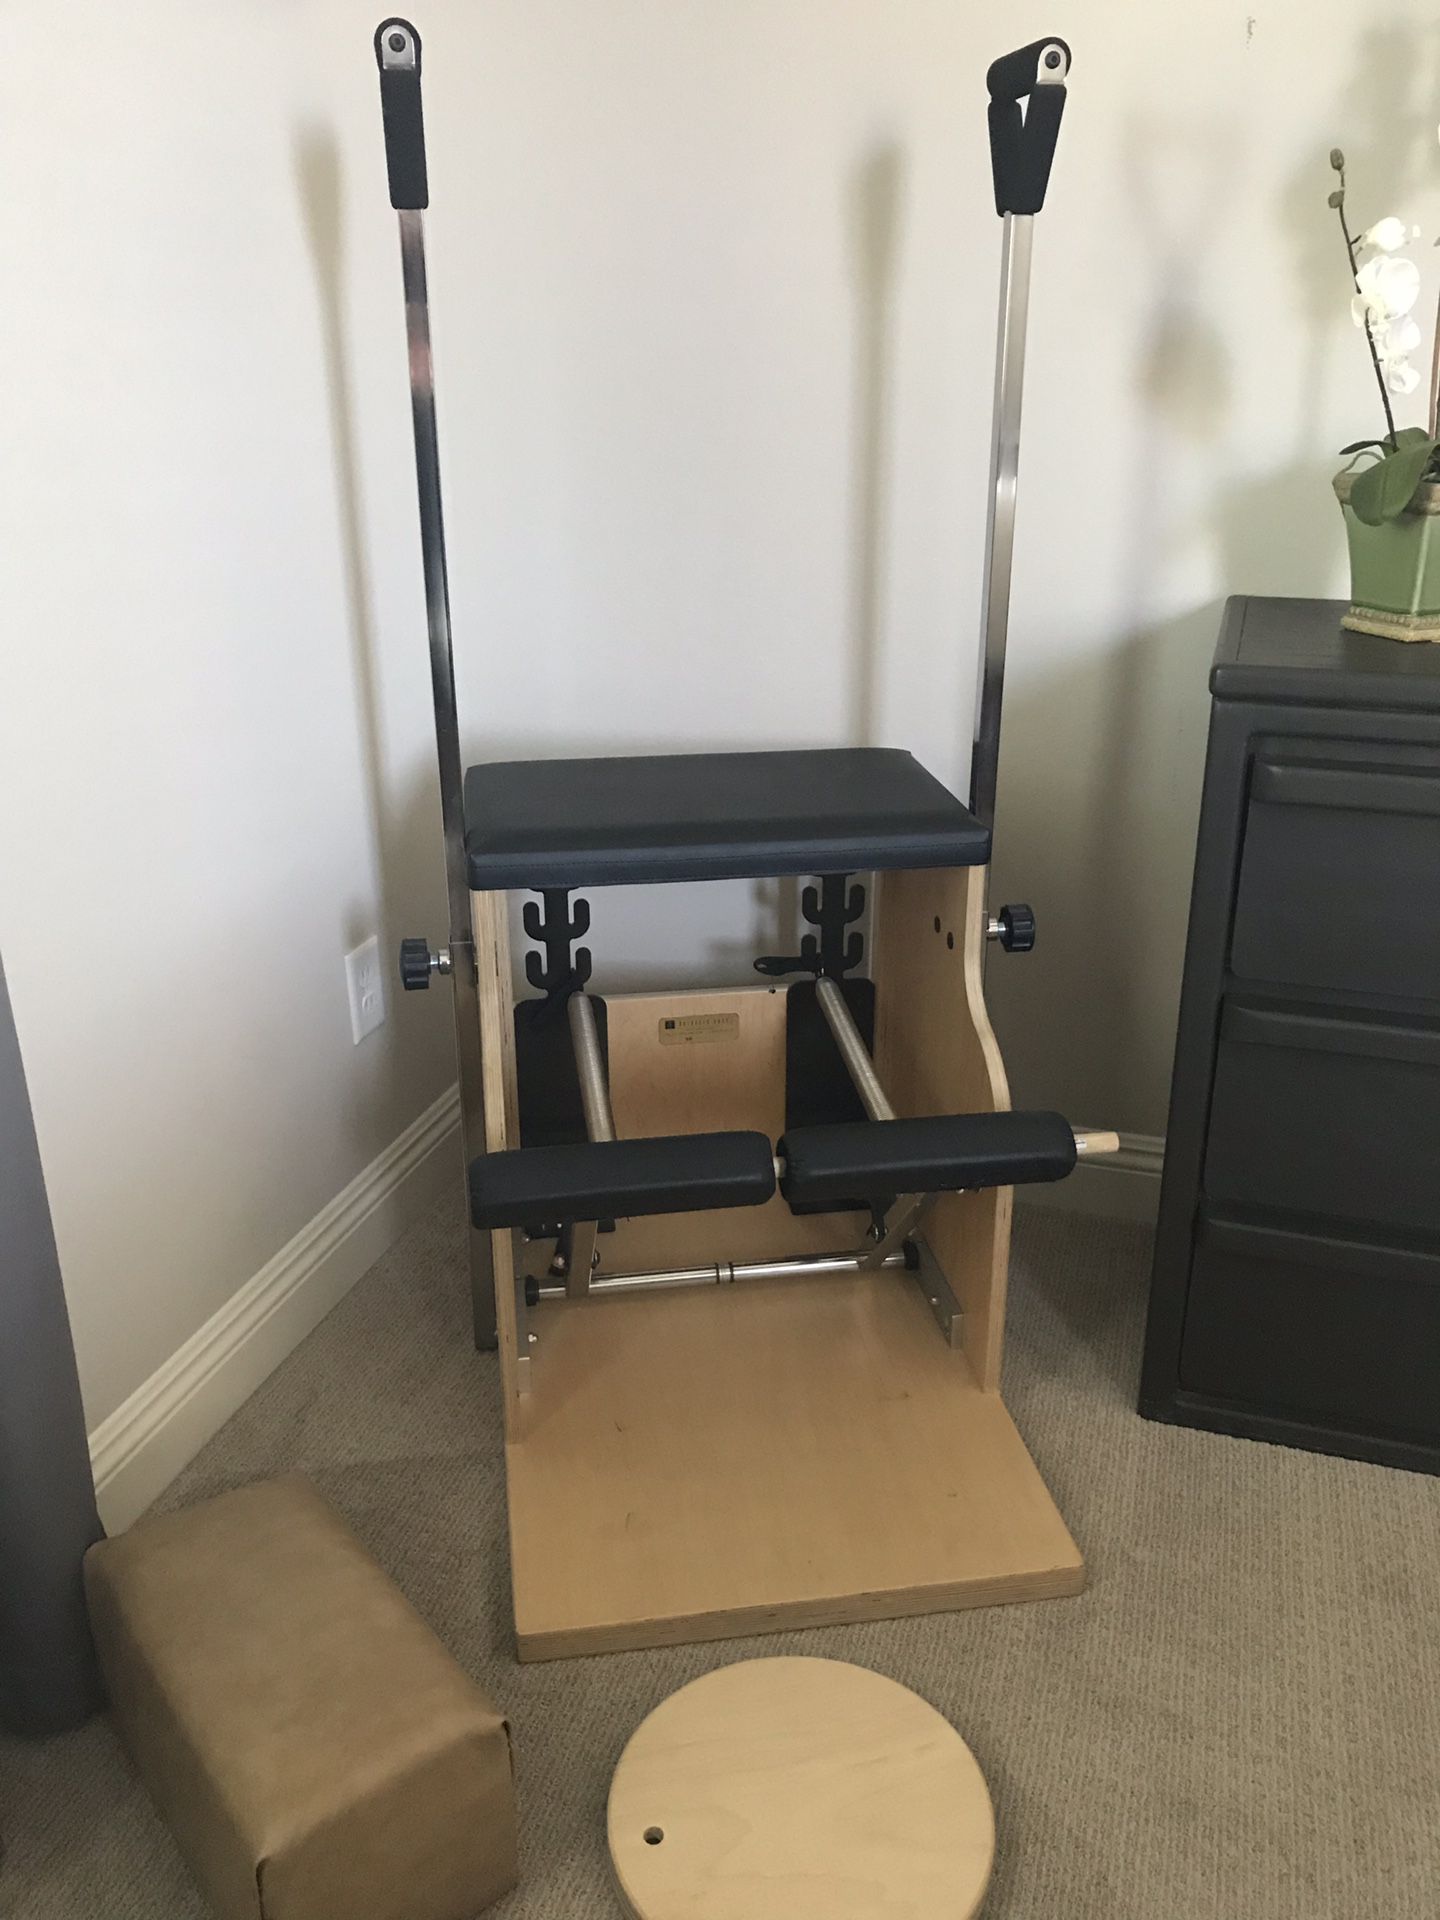 Pilates Combo Chair by Balanced Body for Sale in Las Vegas, NV